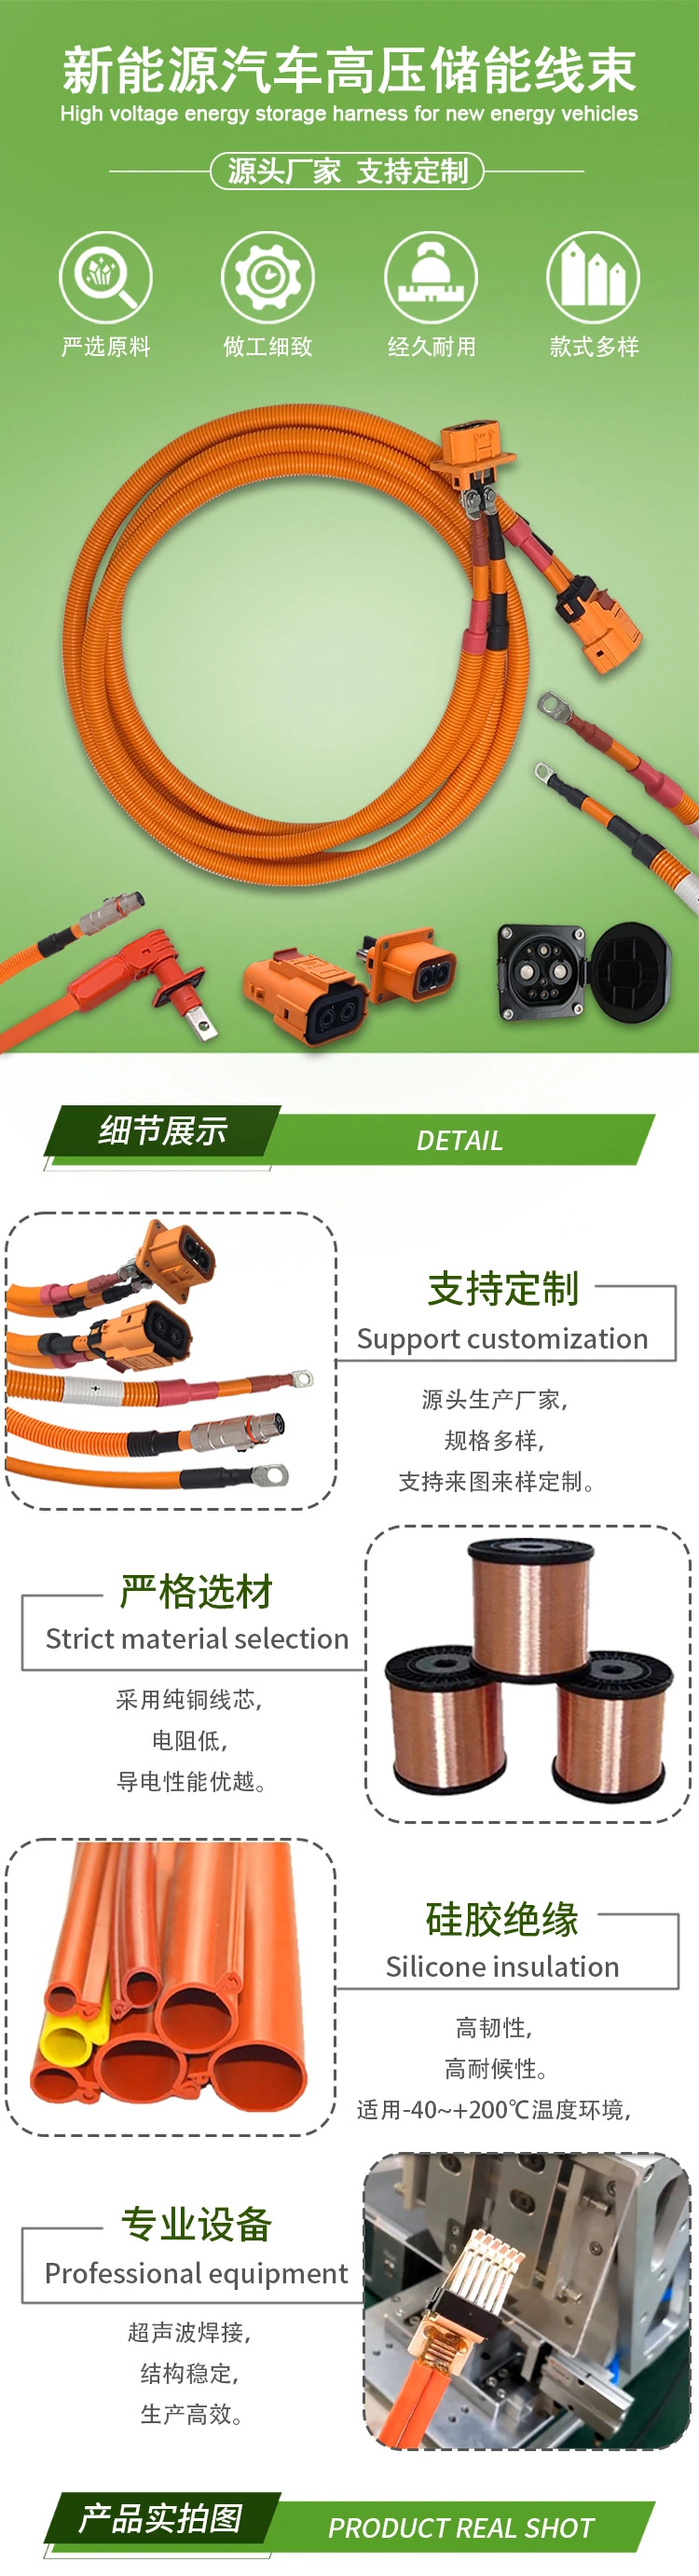 Source Factory Customized New Energy Electric Vehicle Container Power Battery Connection Cable High-Voltage Charging Wire EV Hv Car Automotive Wiring Harness